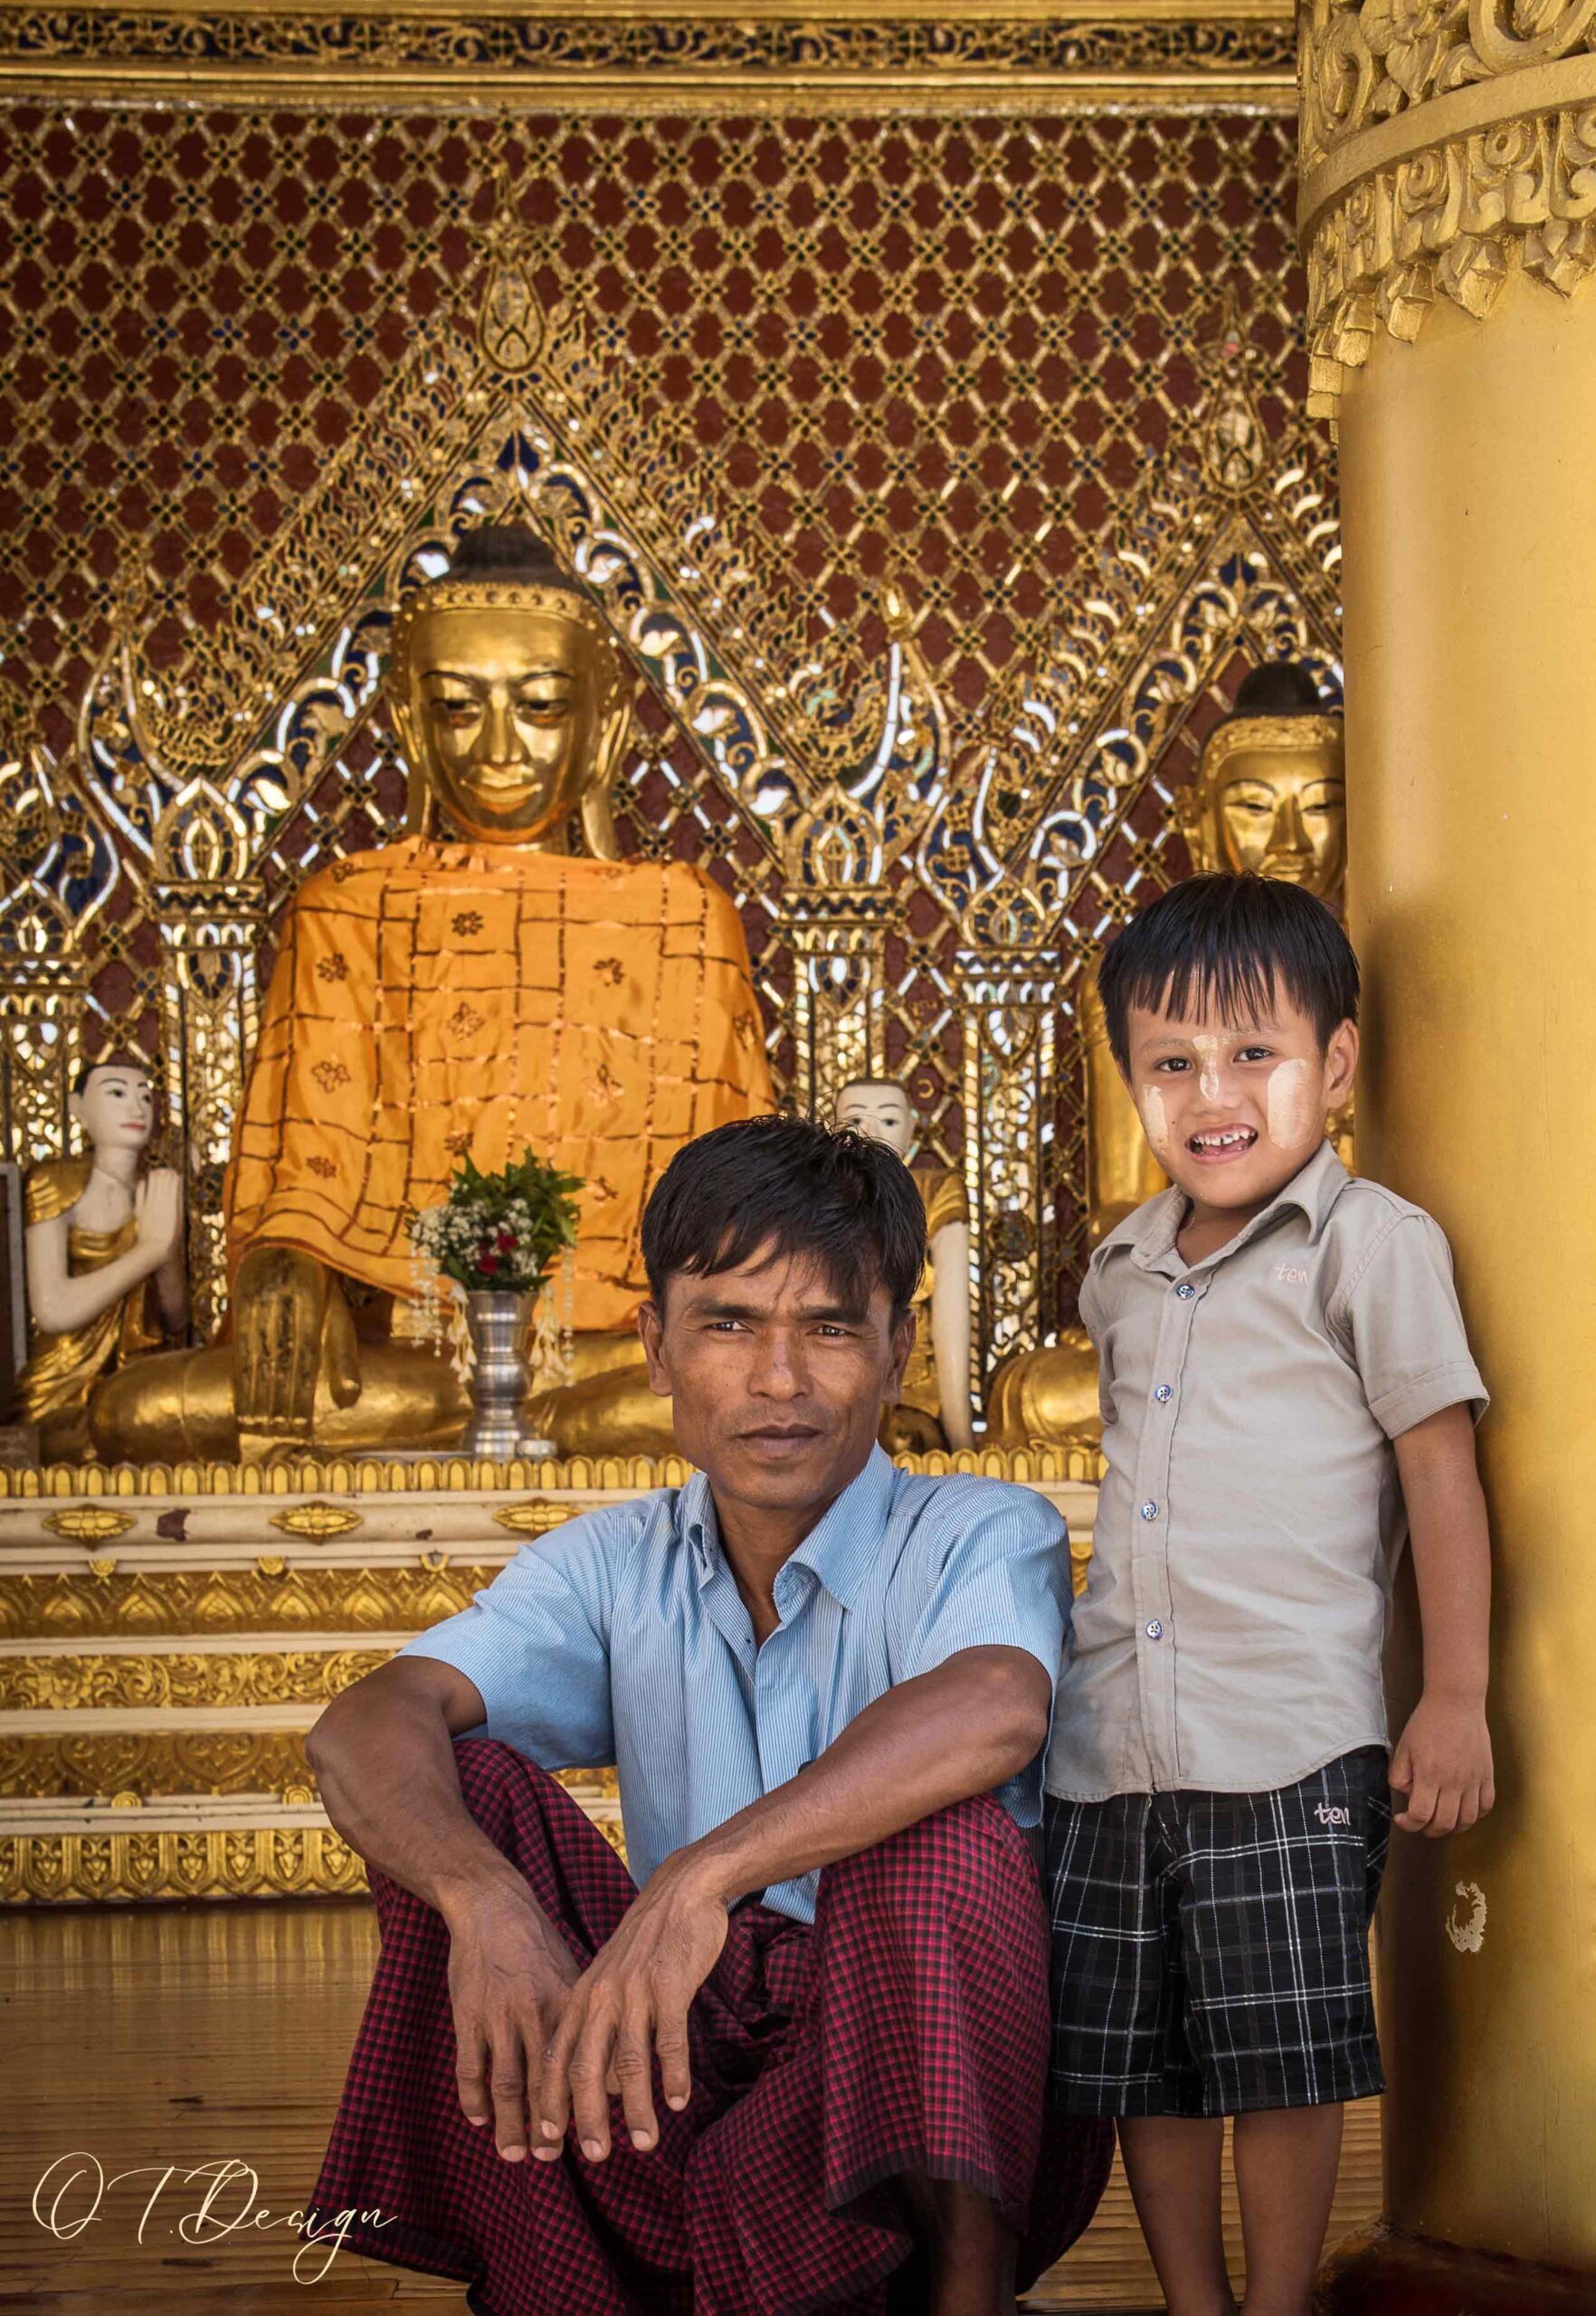 Father and his son in a sacred temple in Yangon, Myanmar 